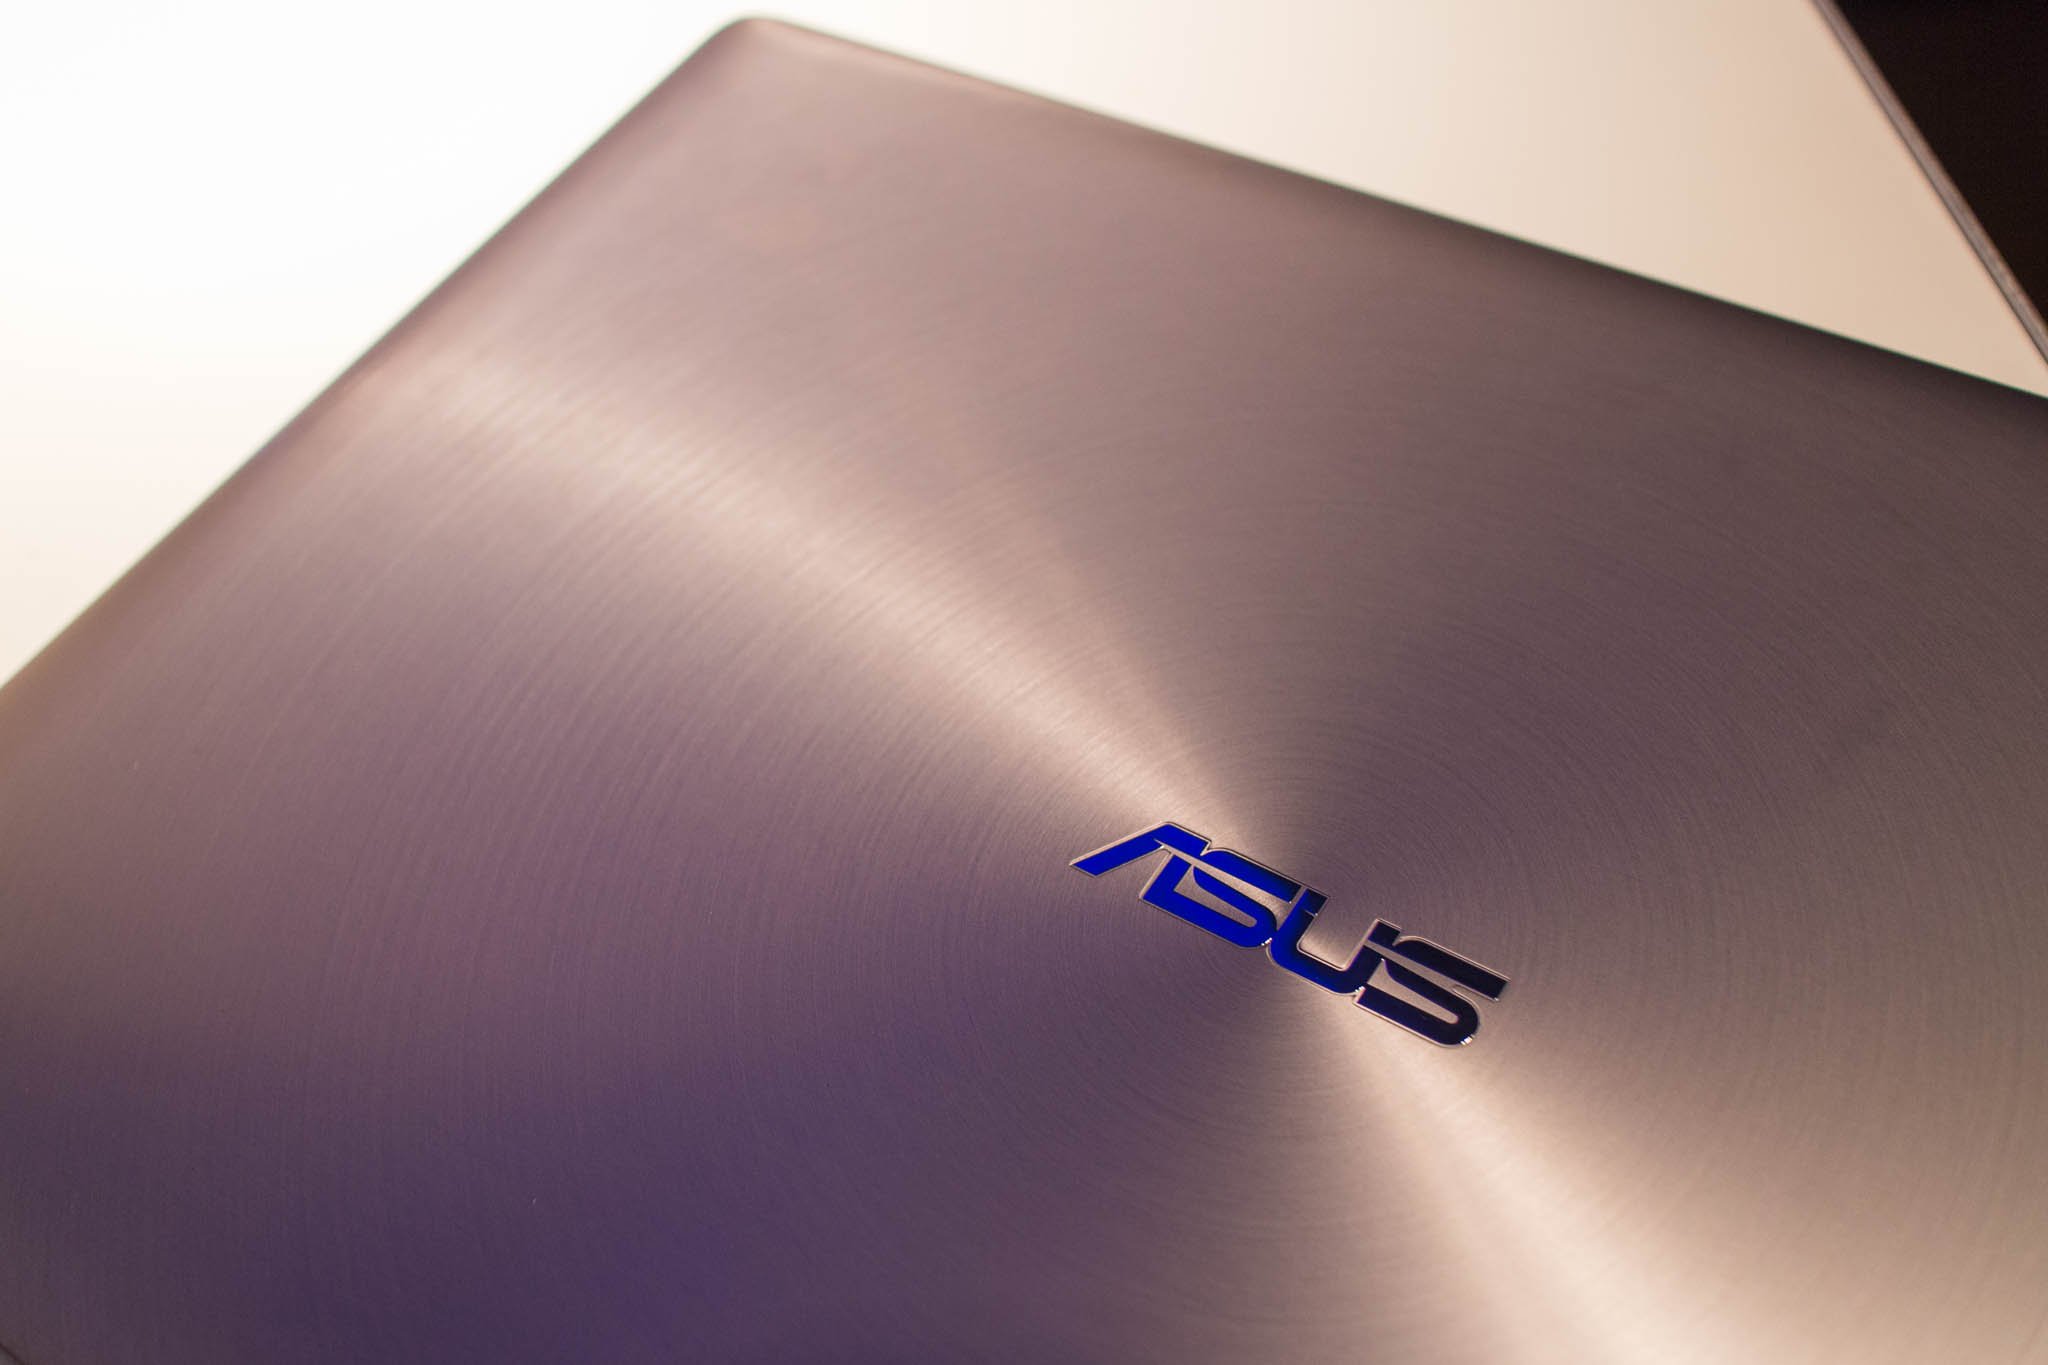 Asus unwittingly pushed out malware to 57,000 PCs, security firm says